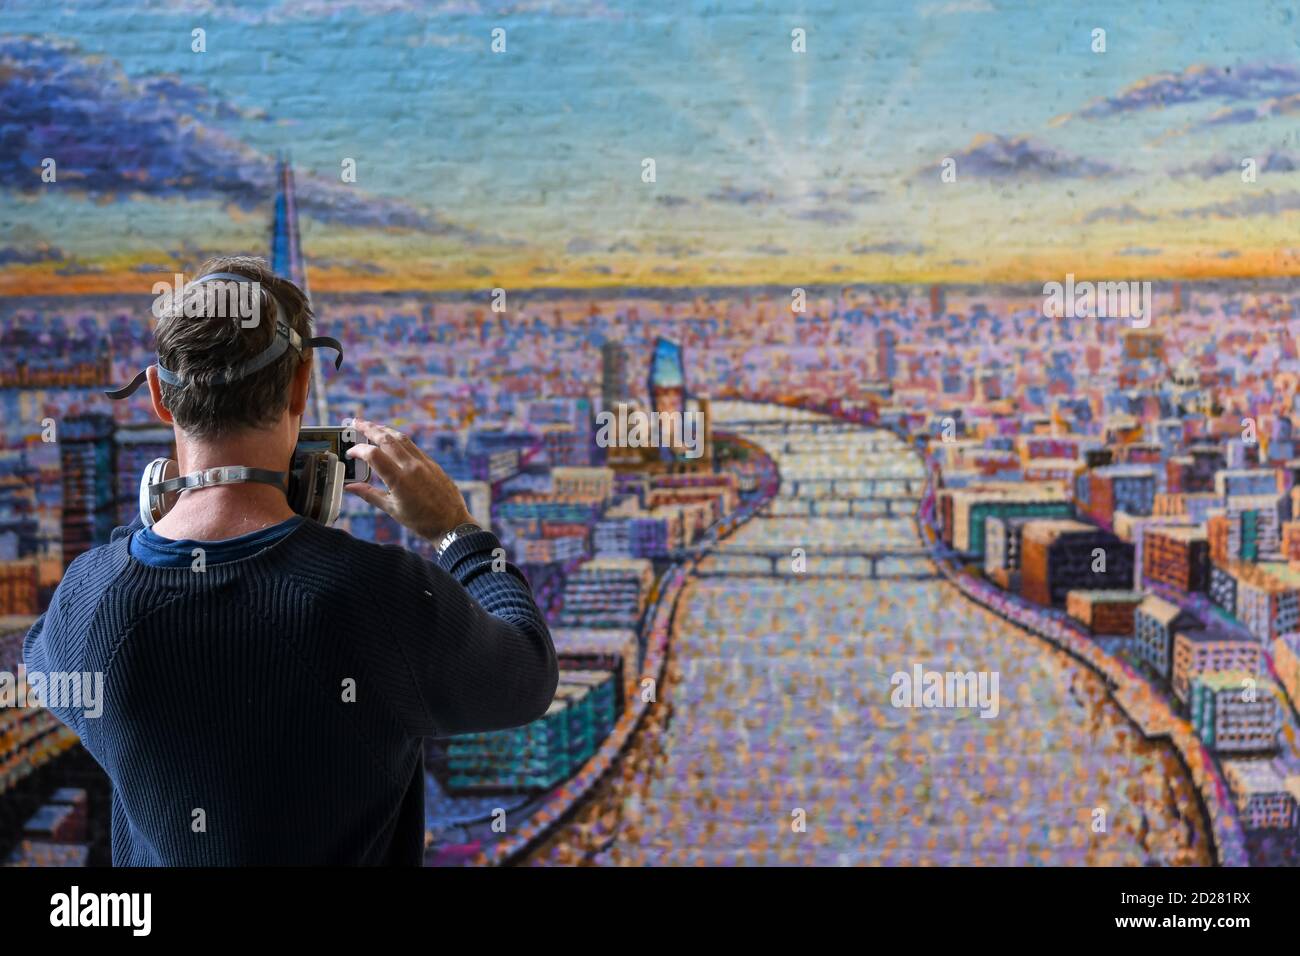 London cityscape mural by Jimmy C an artist supported by Network Rail. The piece emphasises the life, light and energy of London. This mural can be seen at Blackfriars station near the Thames. Stock Photo